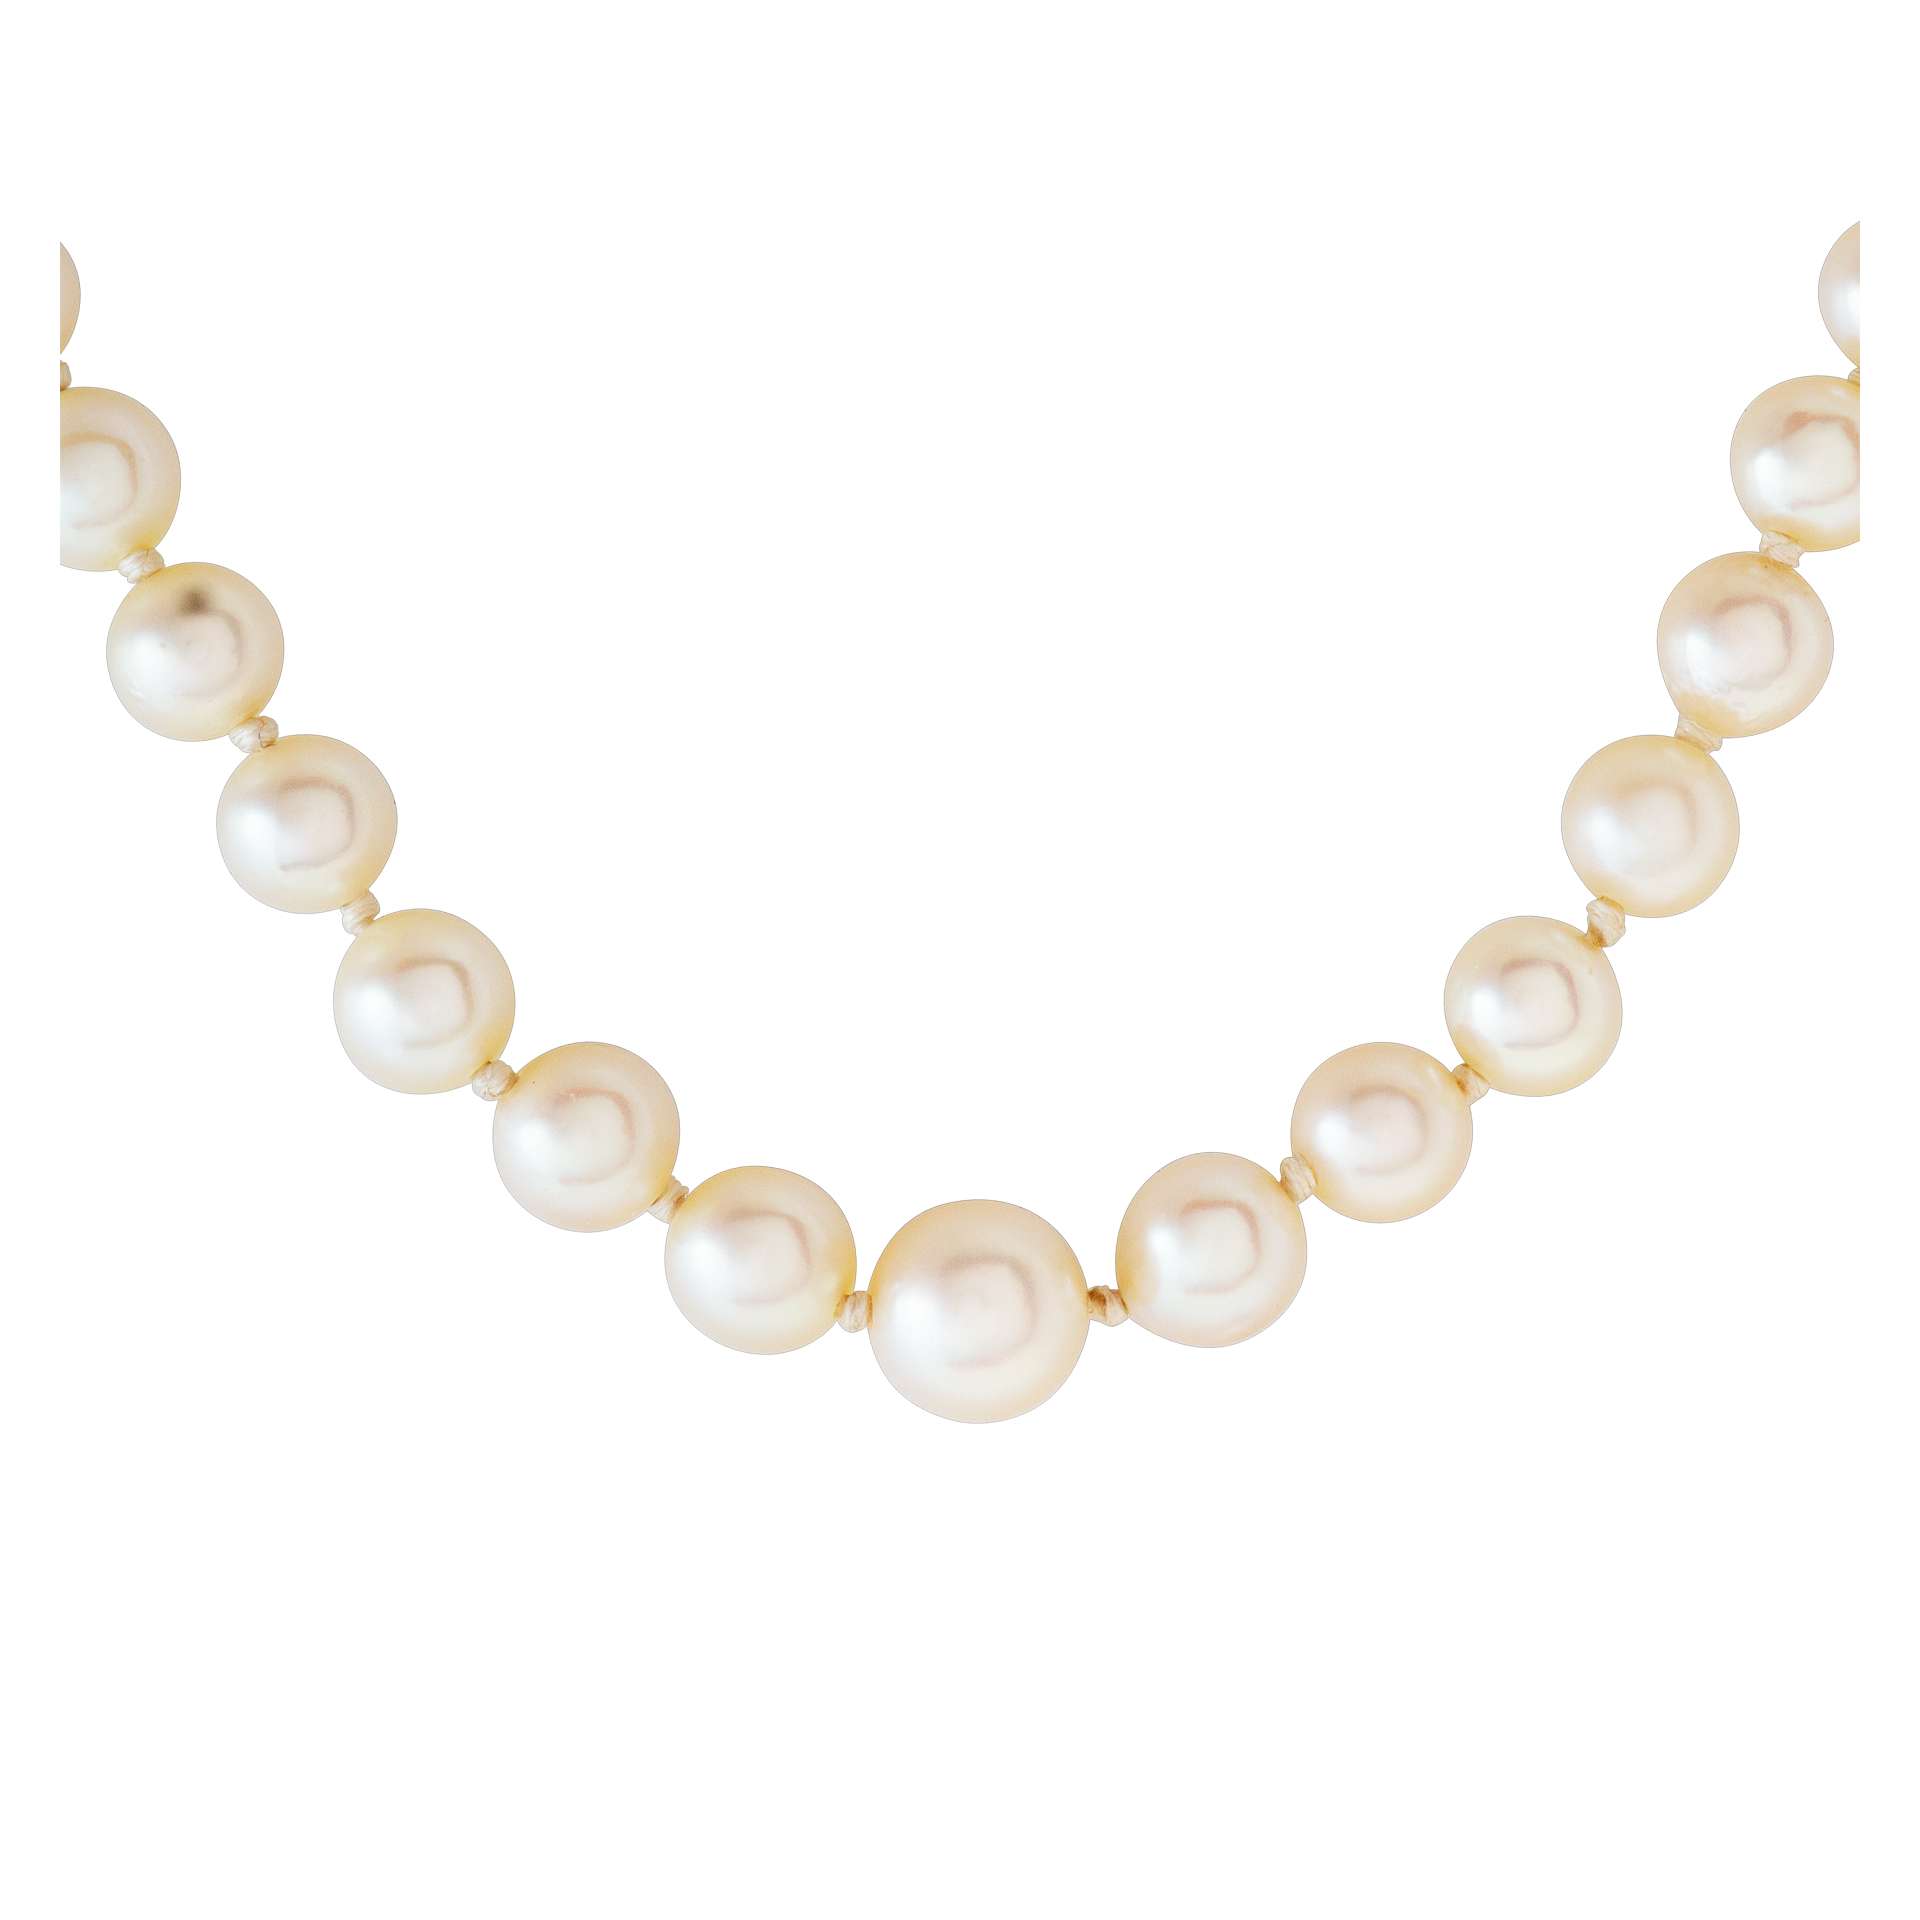 Sweet graduated cultured pearl necklace with a 14k white gold image 1